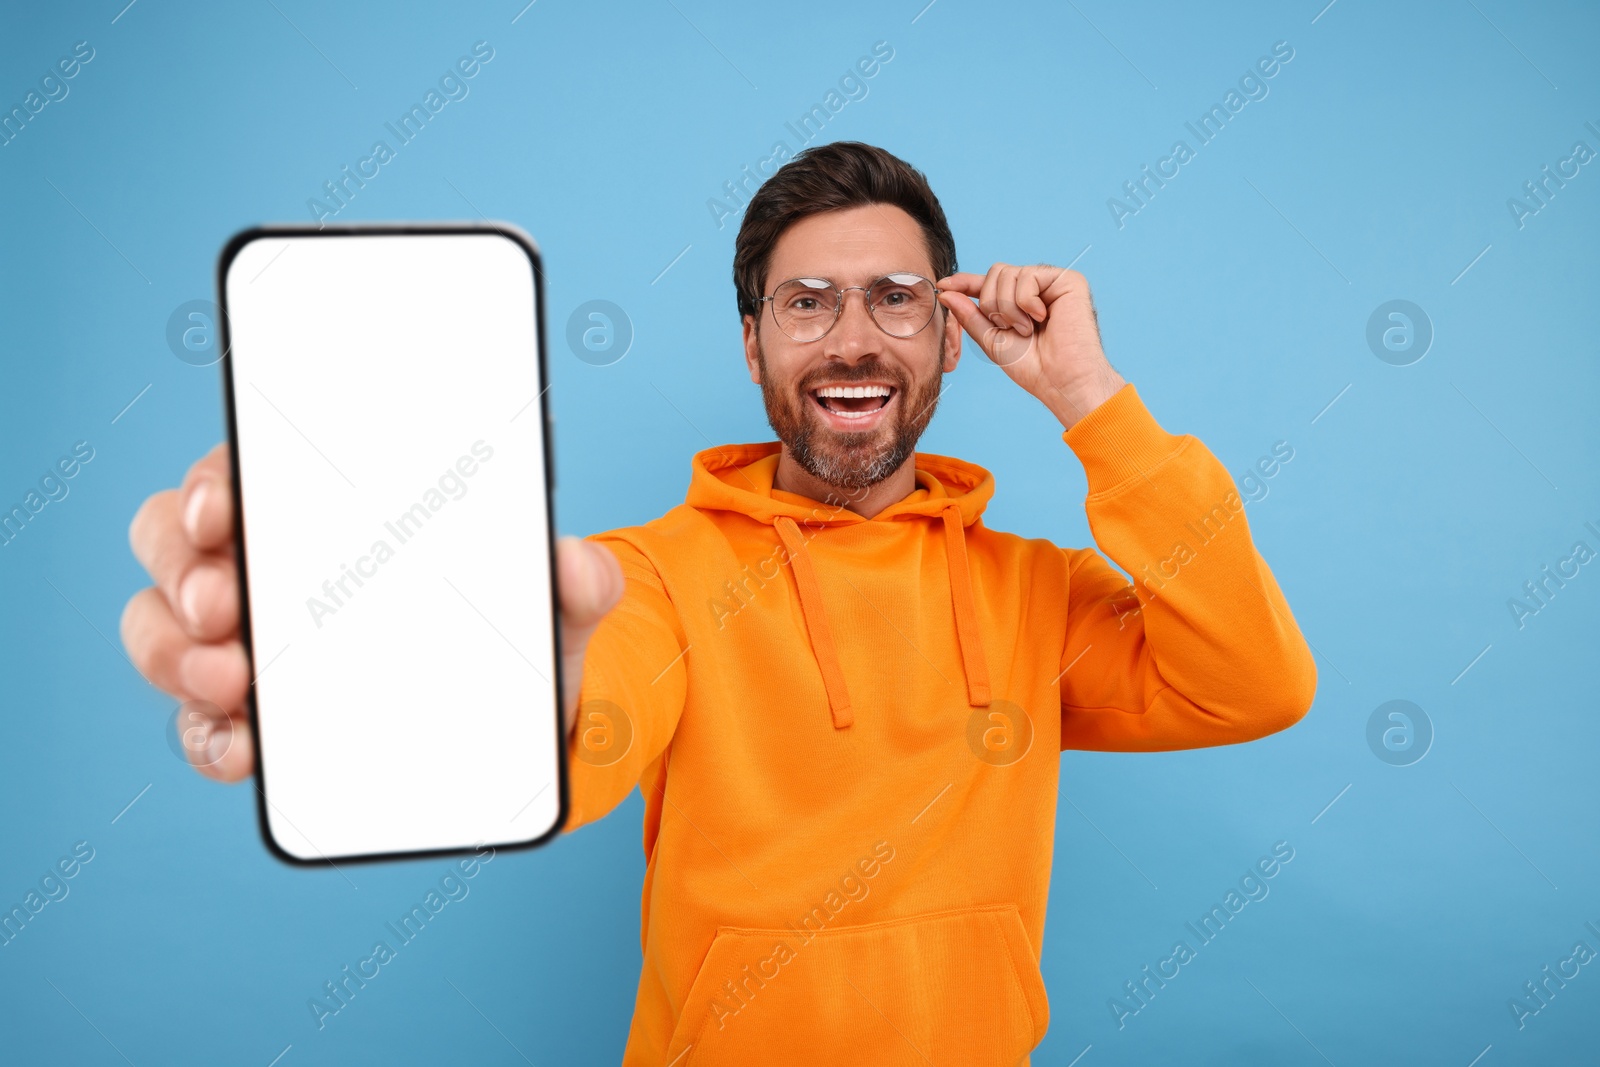 Photo of Handsome man showing smartphone in hand on light blue background